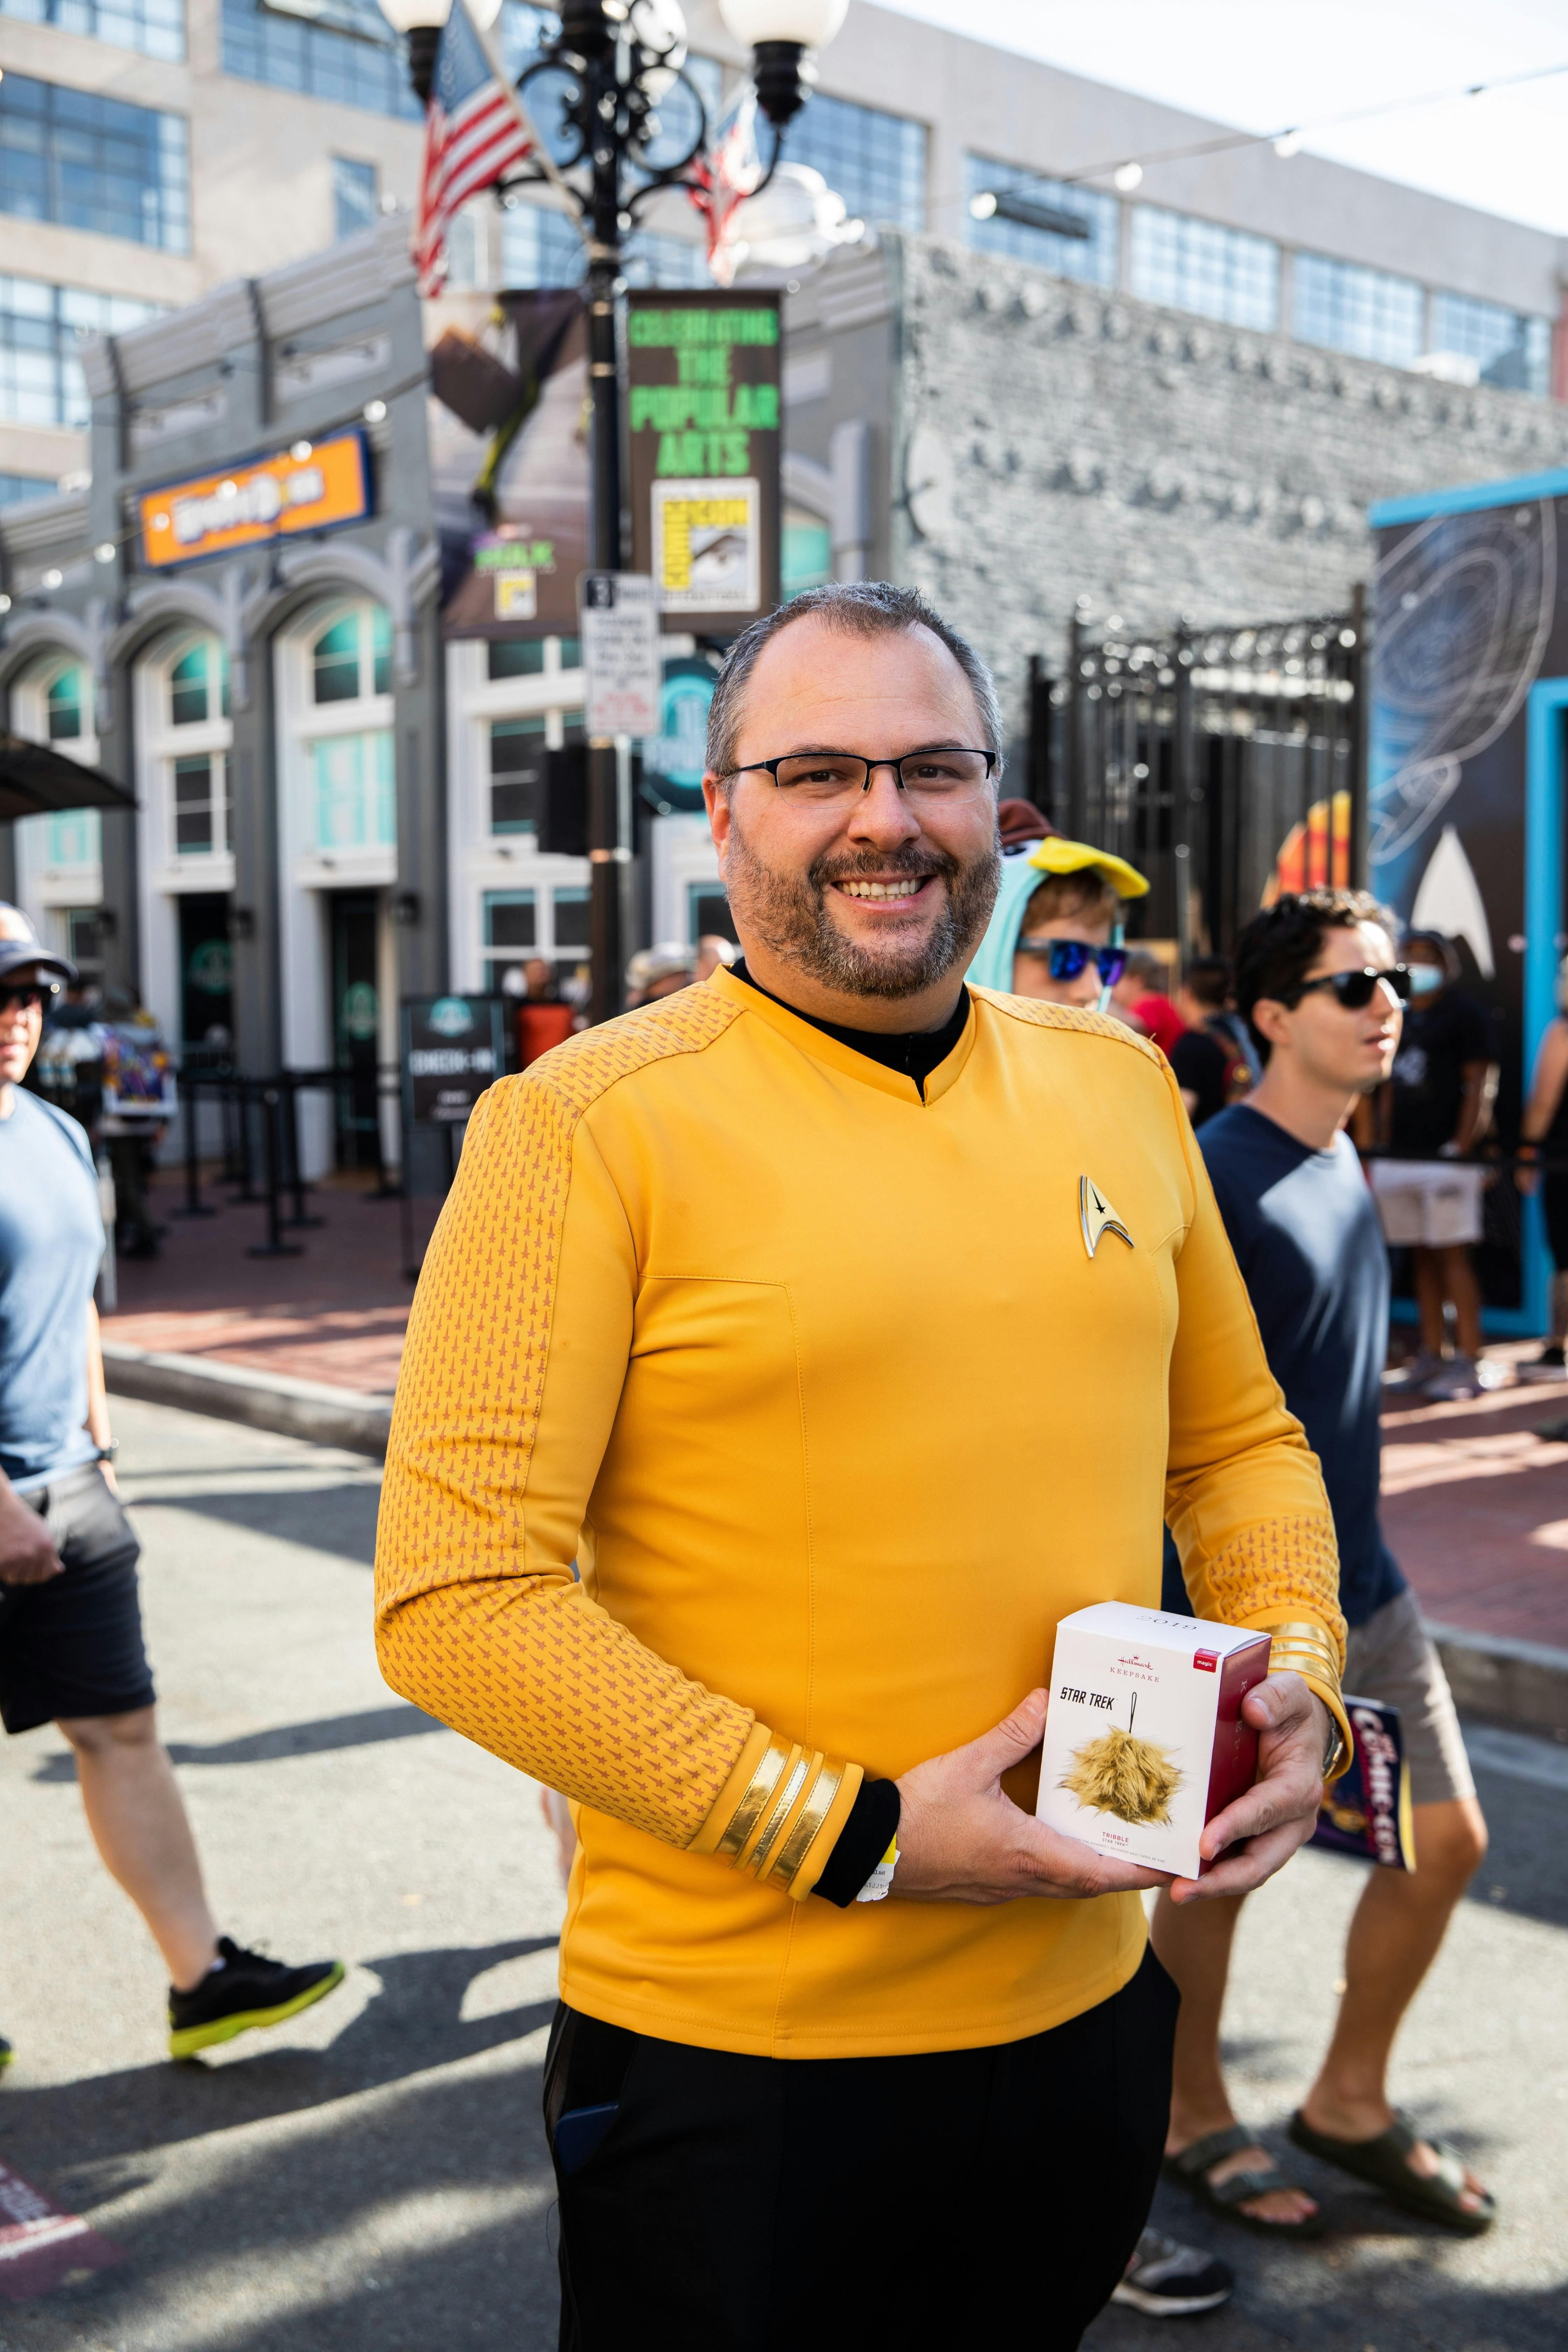 A fan poses in a TOS uniform.